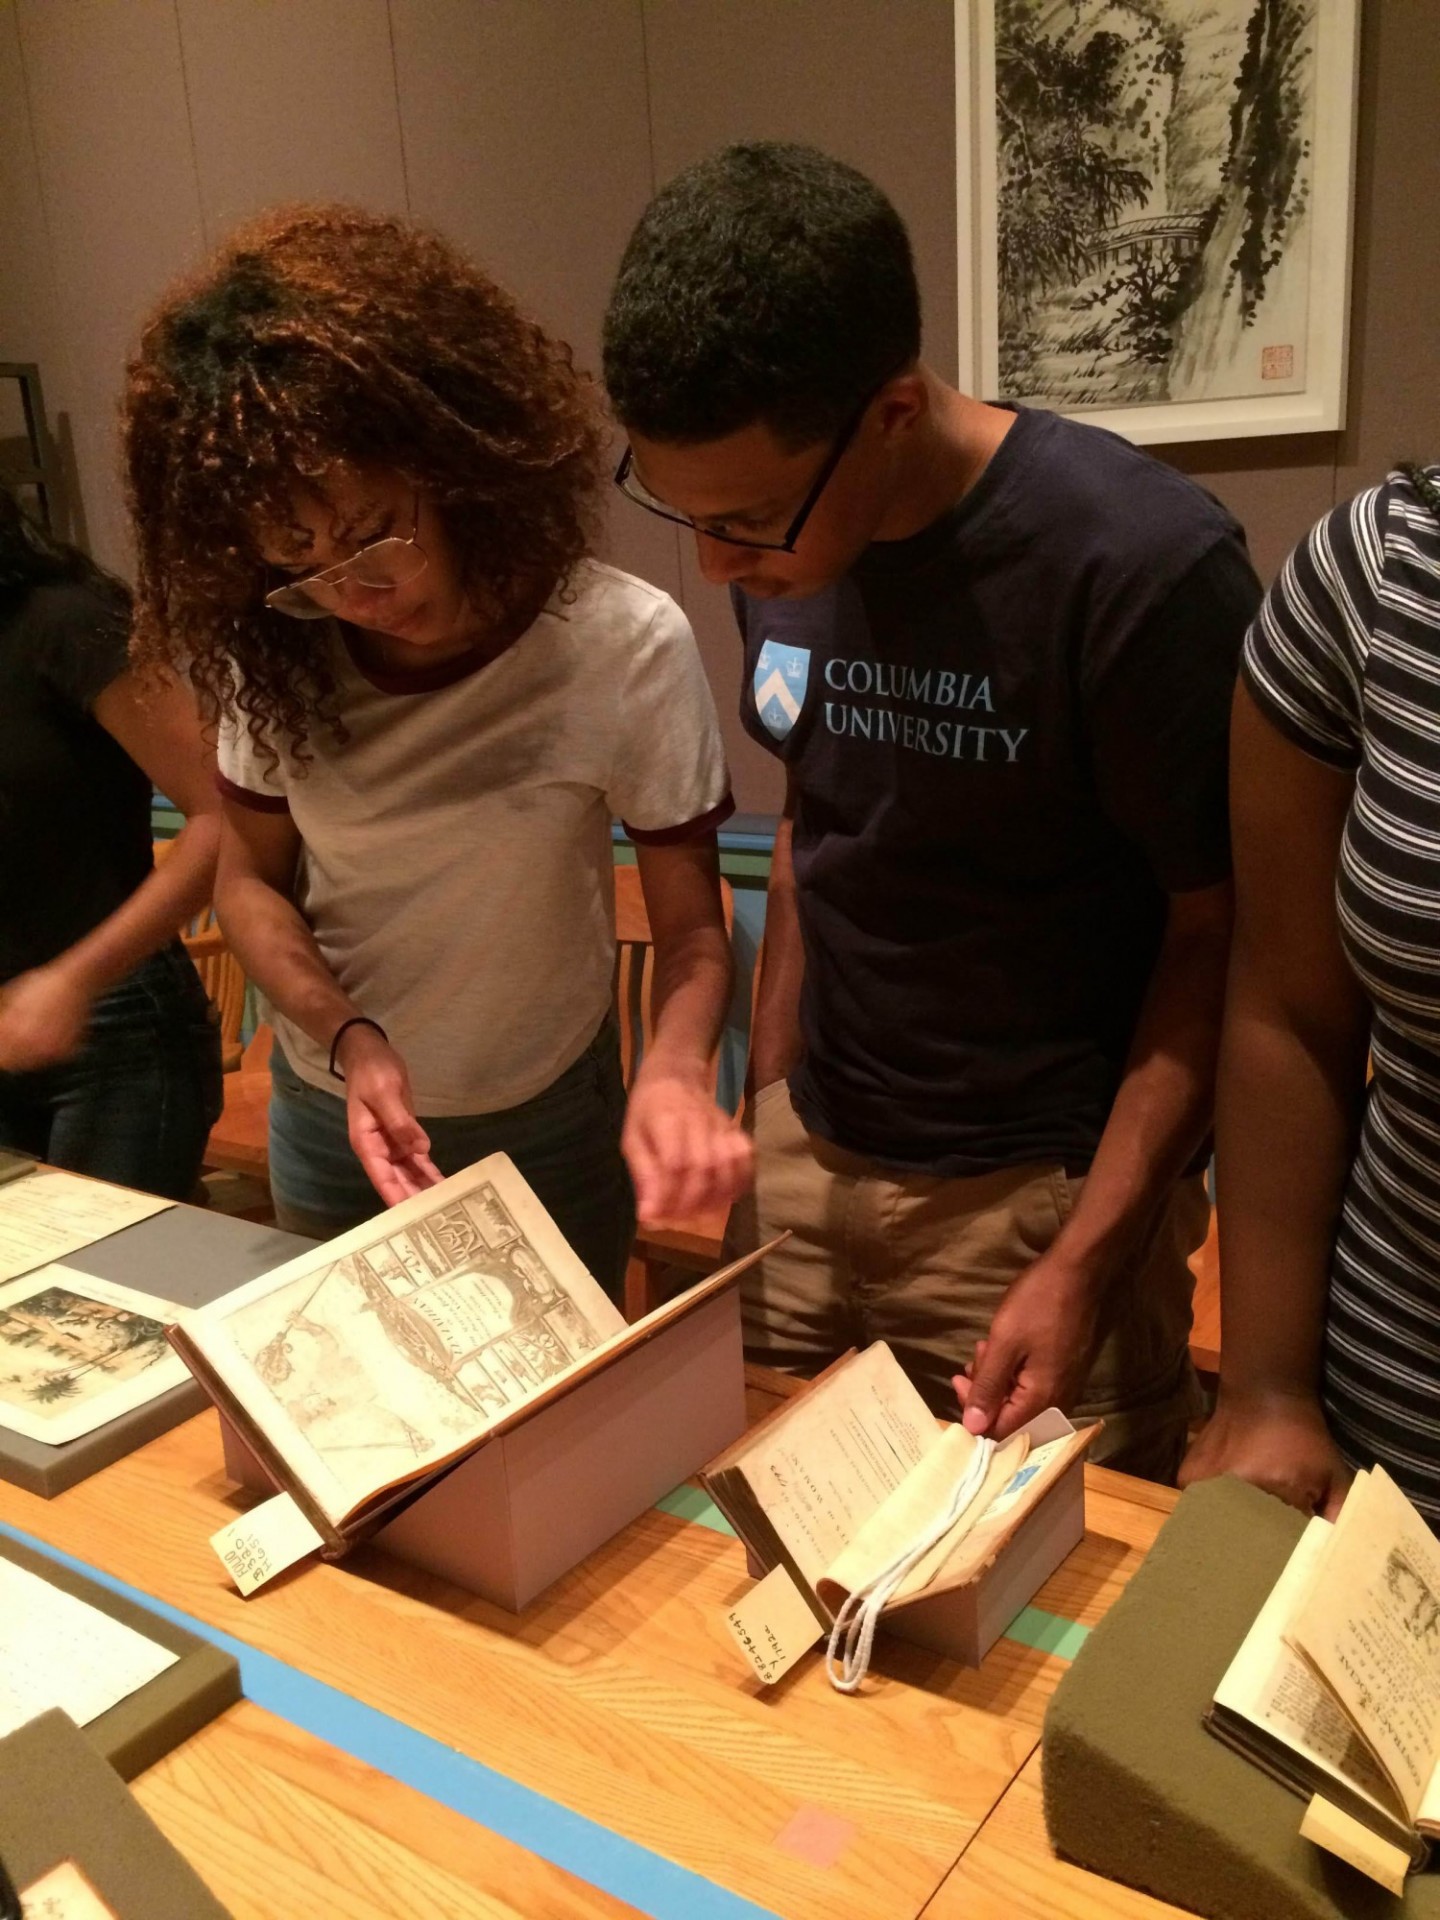 Jennifer (left) and another student looking at documents in Columbia's Rare Book and Manuscript Library